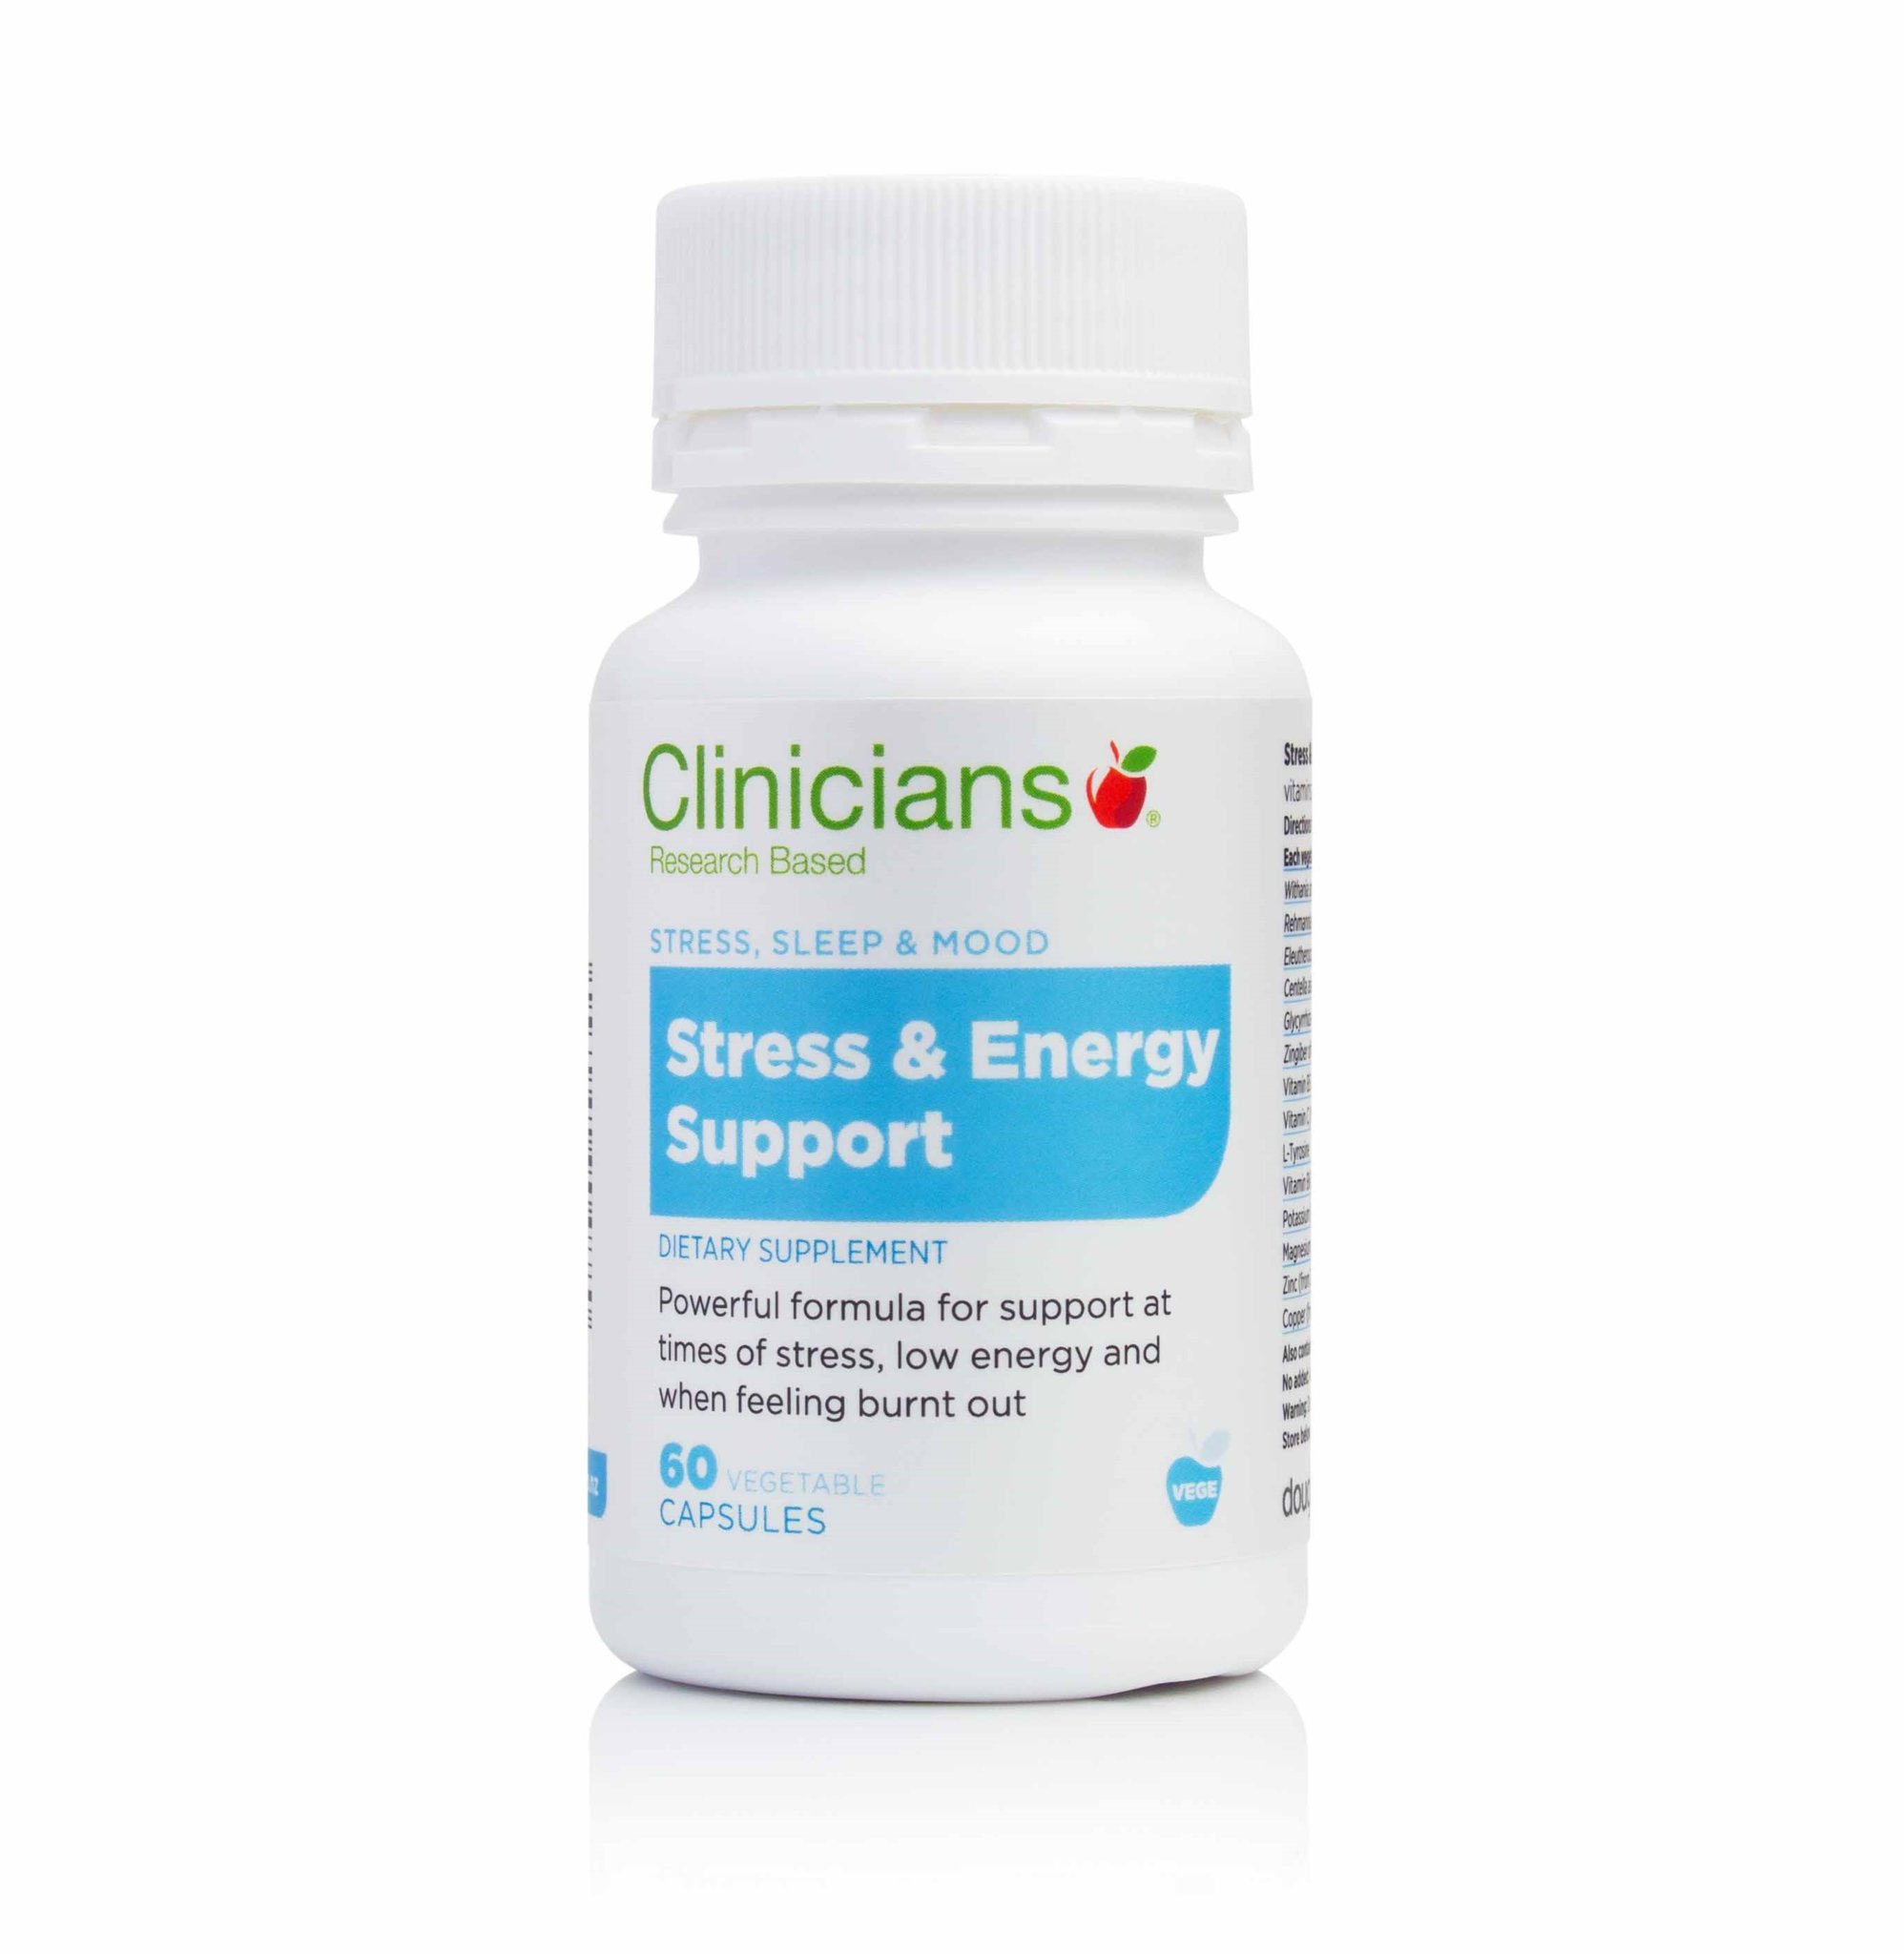 Clinicians Stress & Energy Support 60 Vegetable Capsules